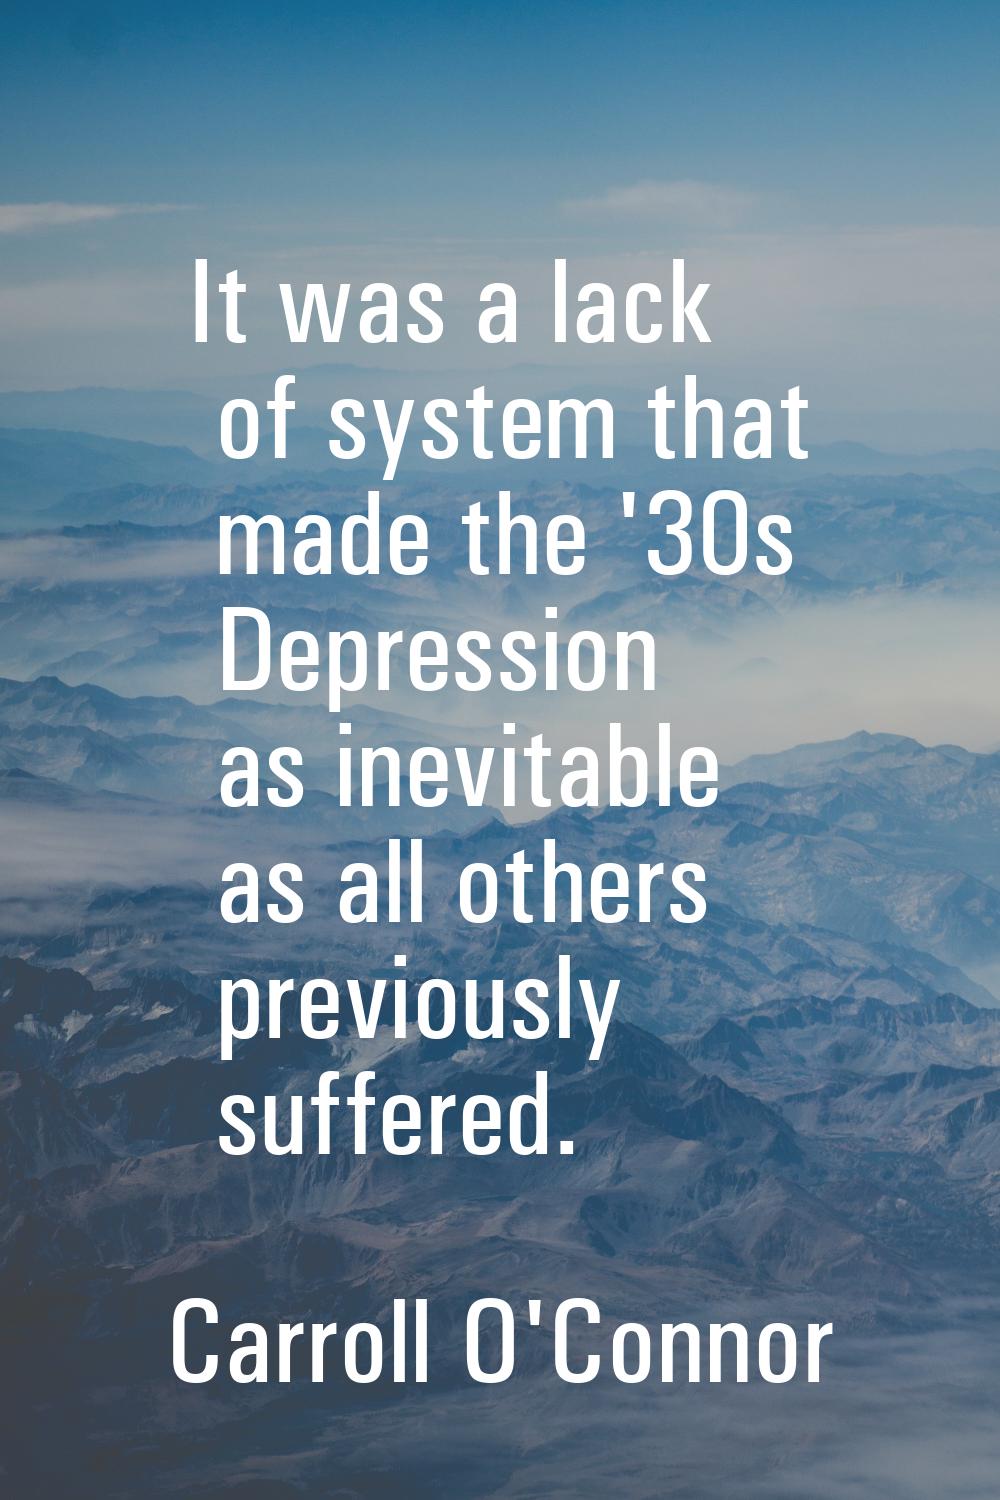 It was a lack of system that made the '30s Depression as inevitable as all others previously suffer